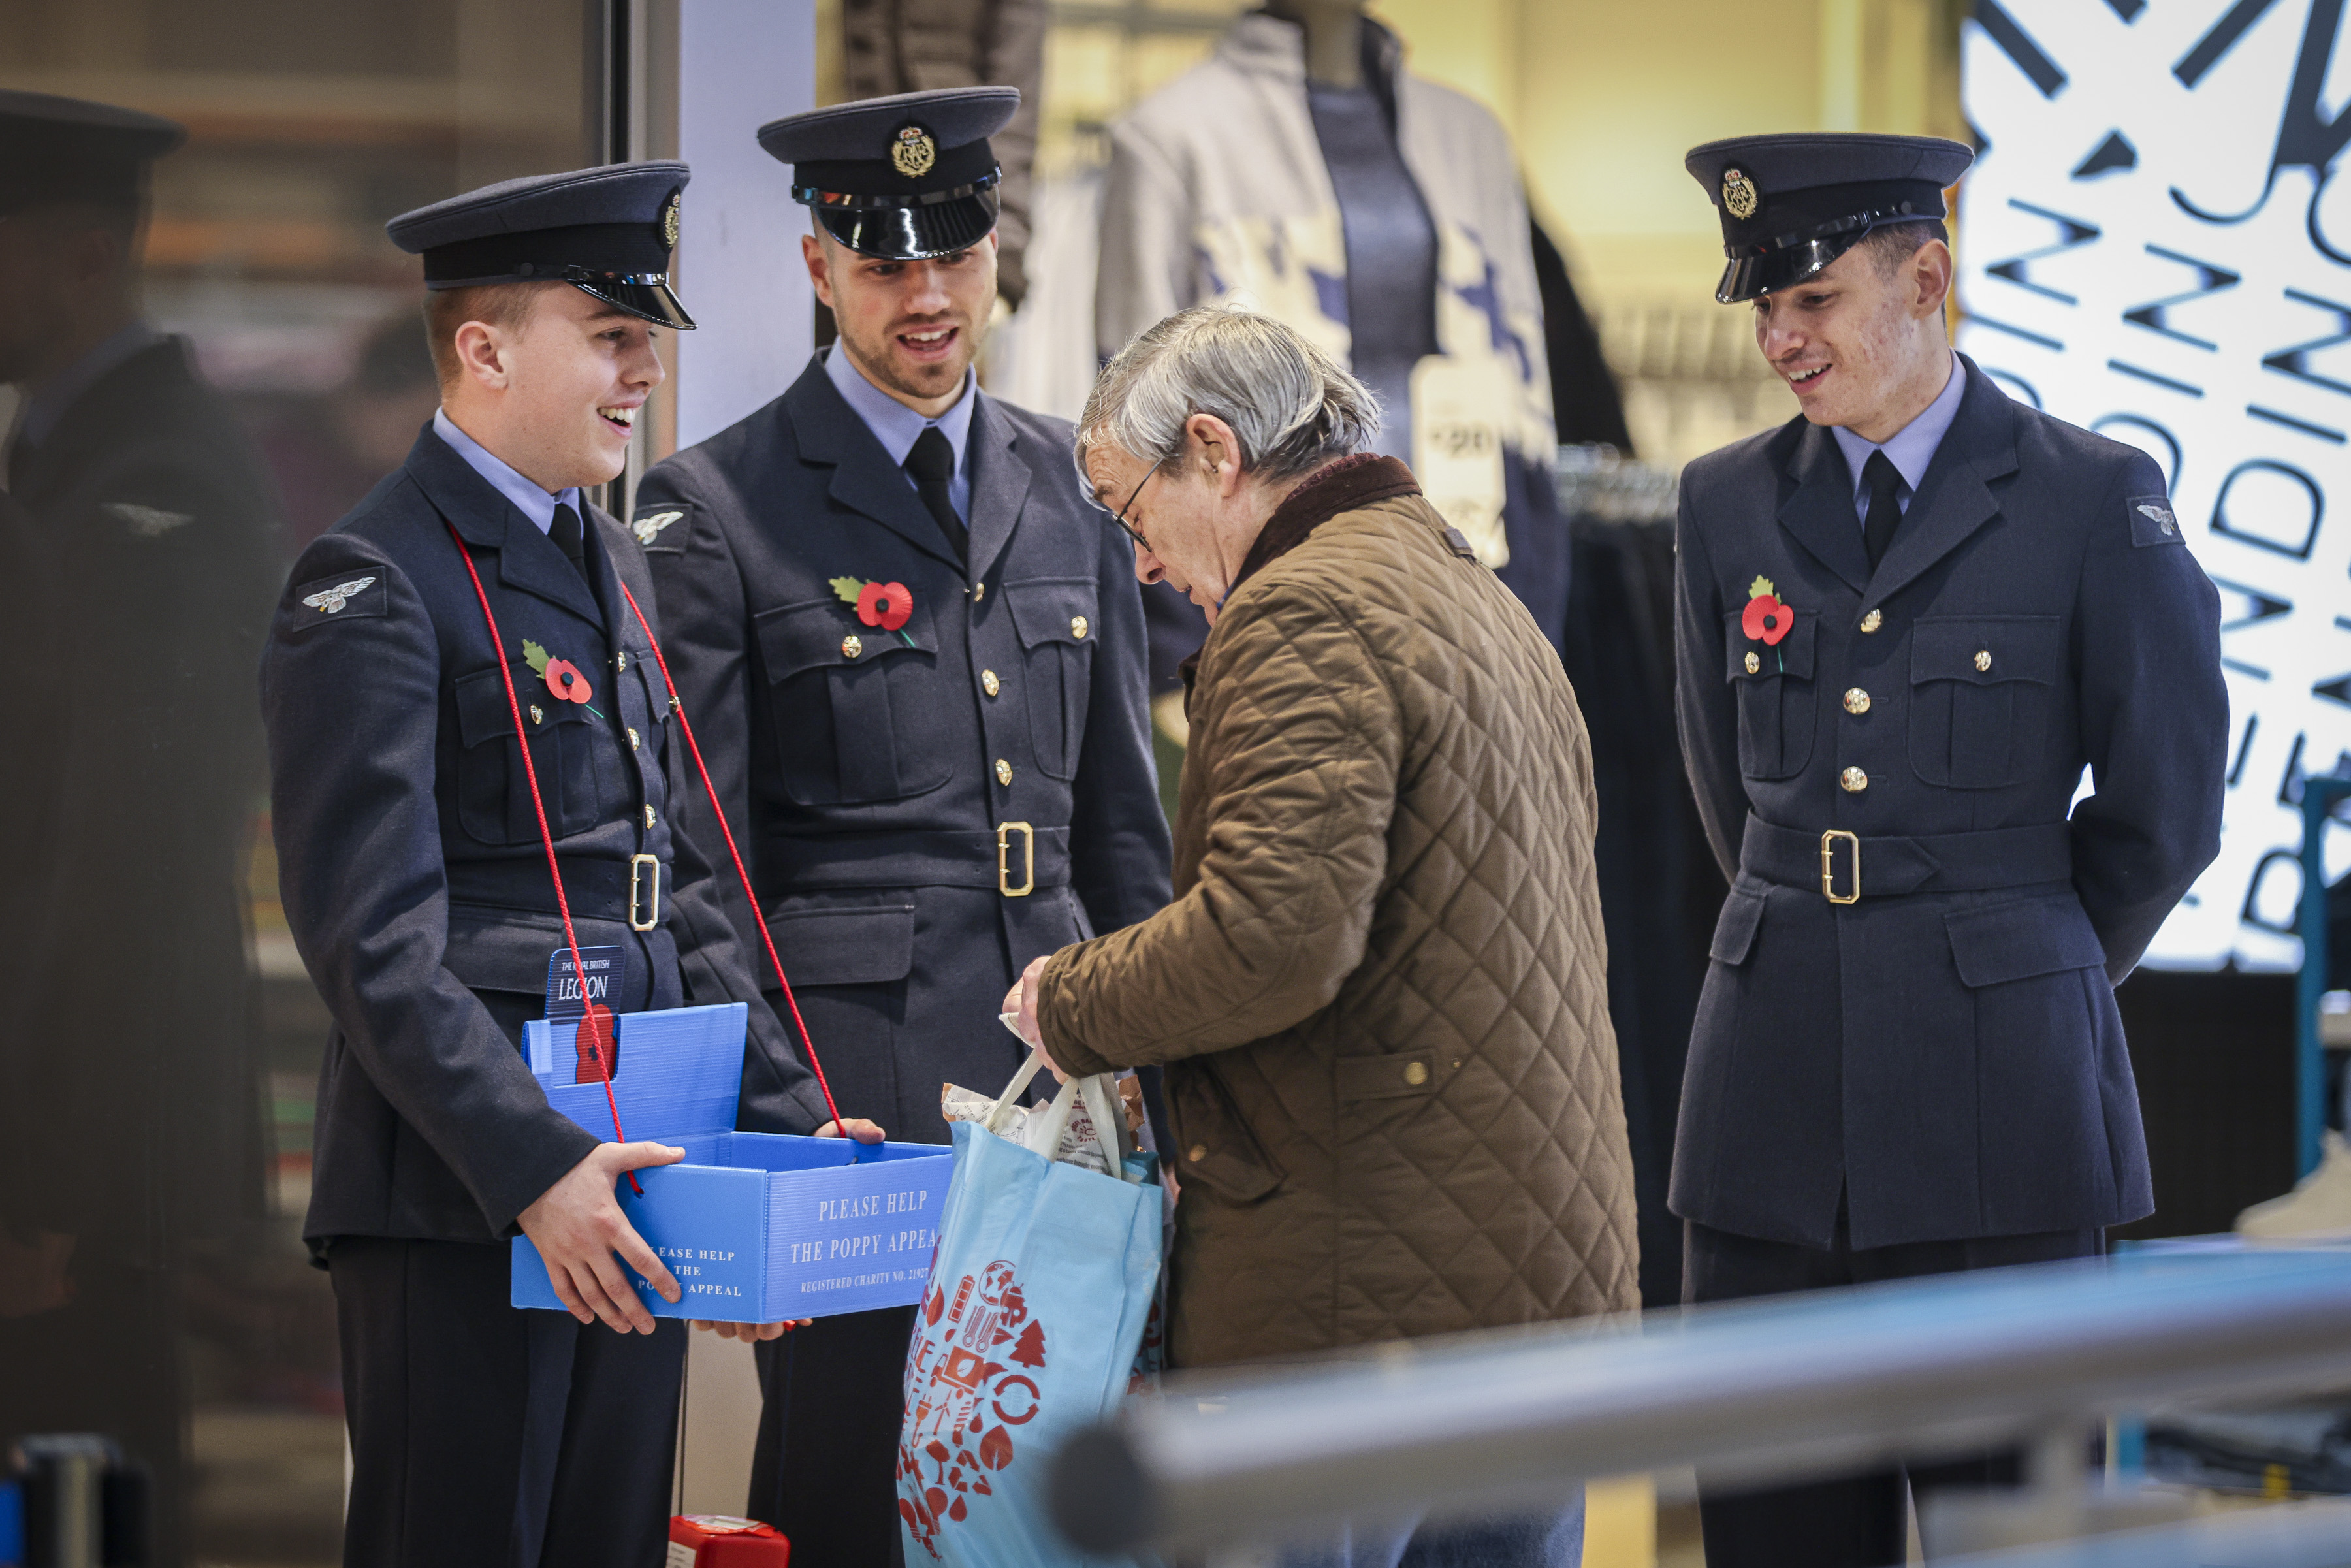 RAF Cosford Apprentices chatting to the locals of Shrewsbury during the poppy appeal within the town centre on 7th Nov 23